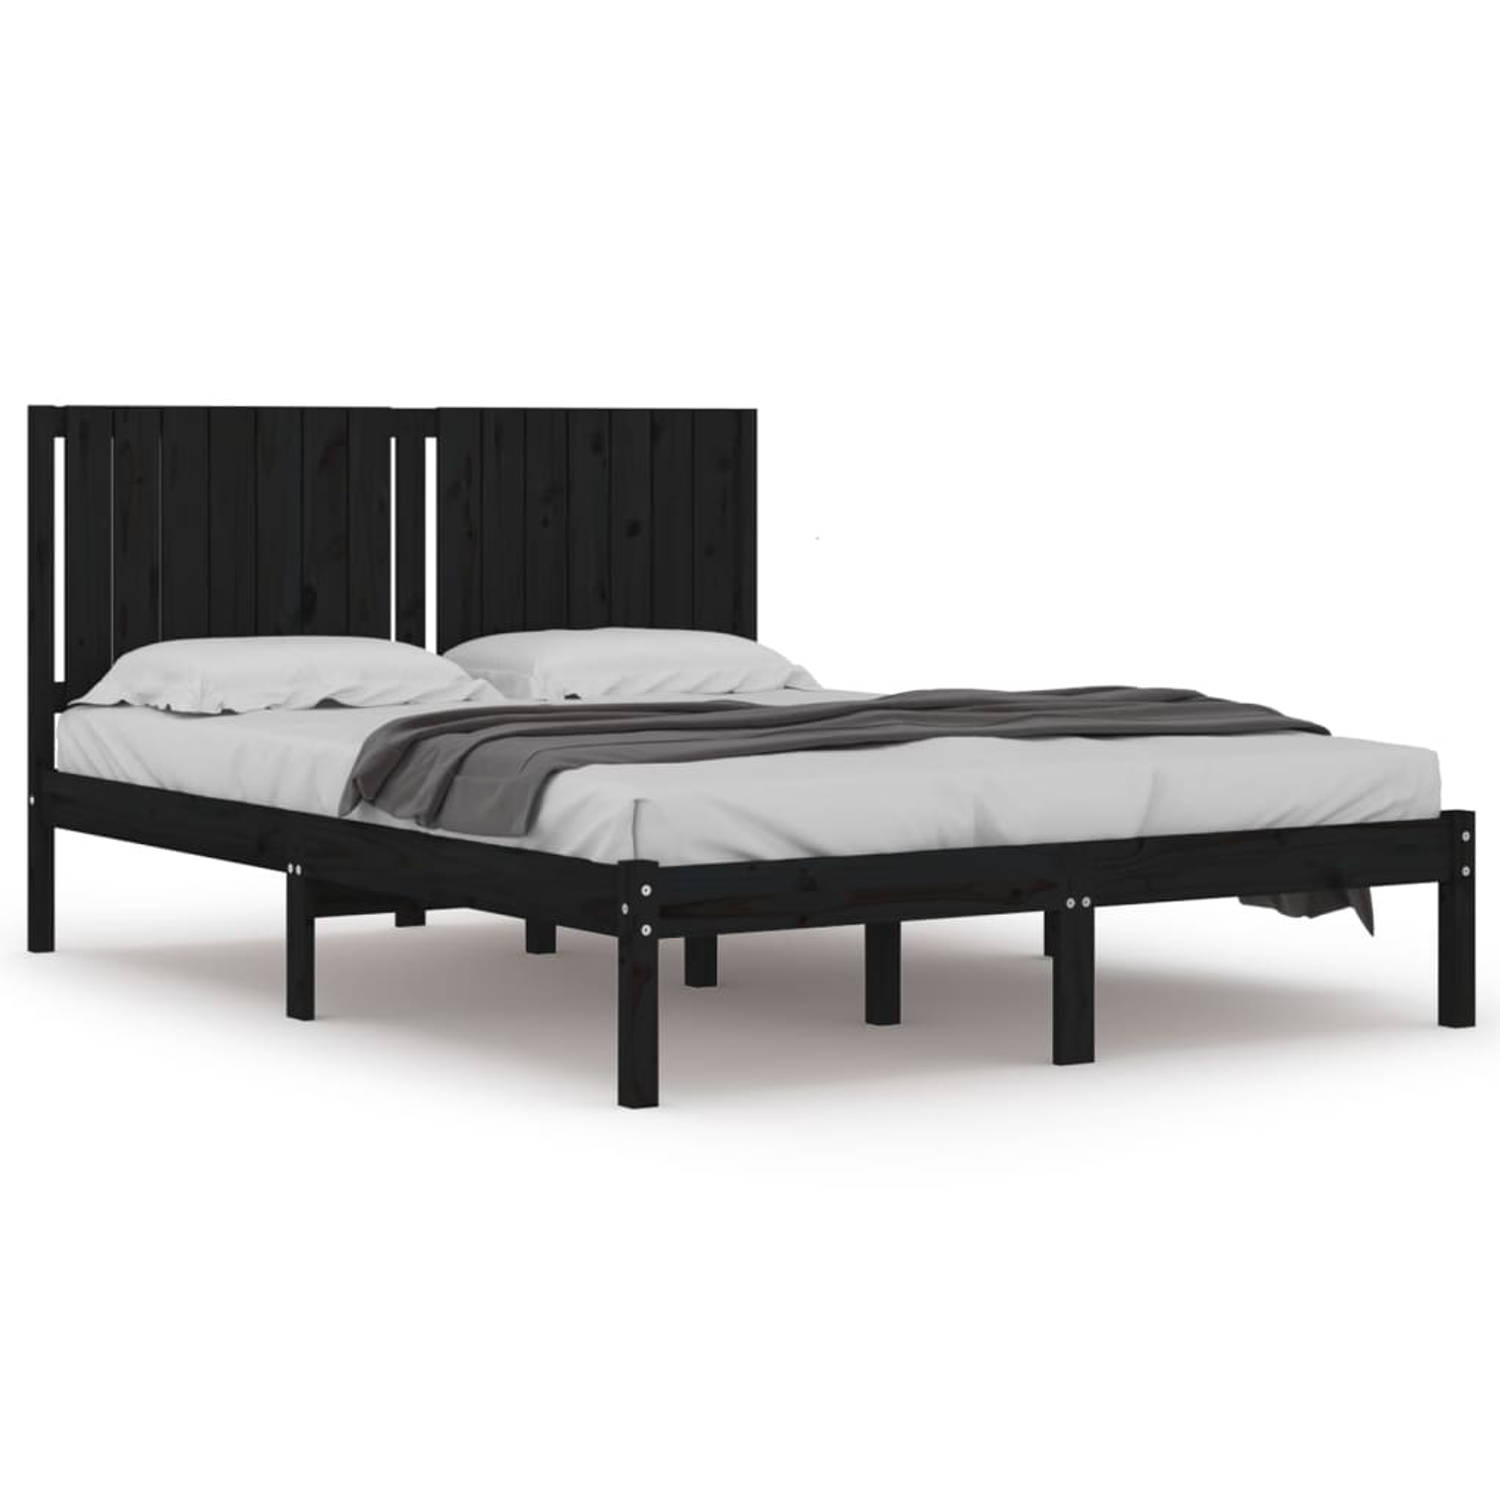 The Living Store Bedframe massief hout zwart 150x200 cm 5FT King Size - Bed